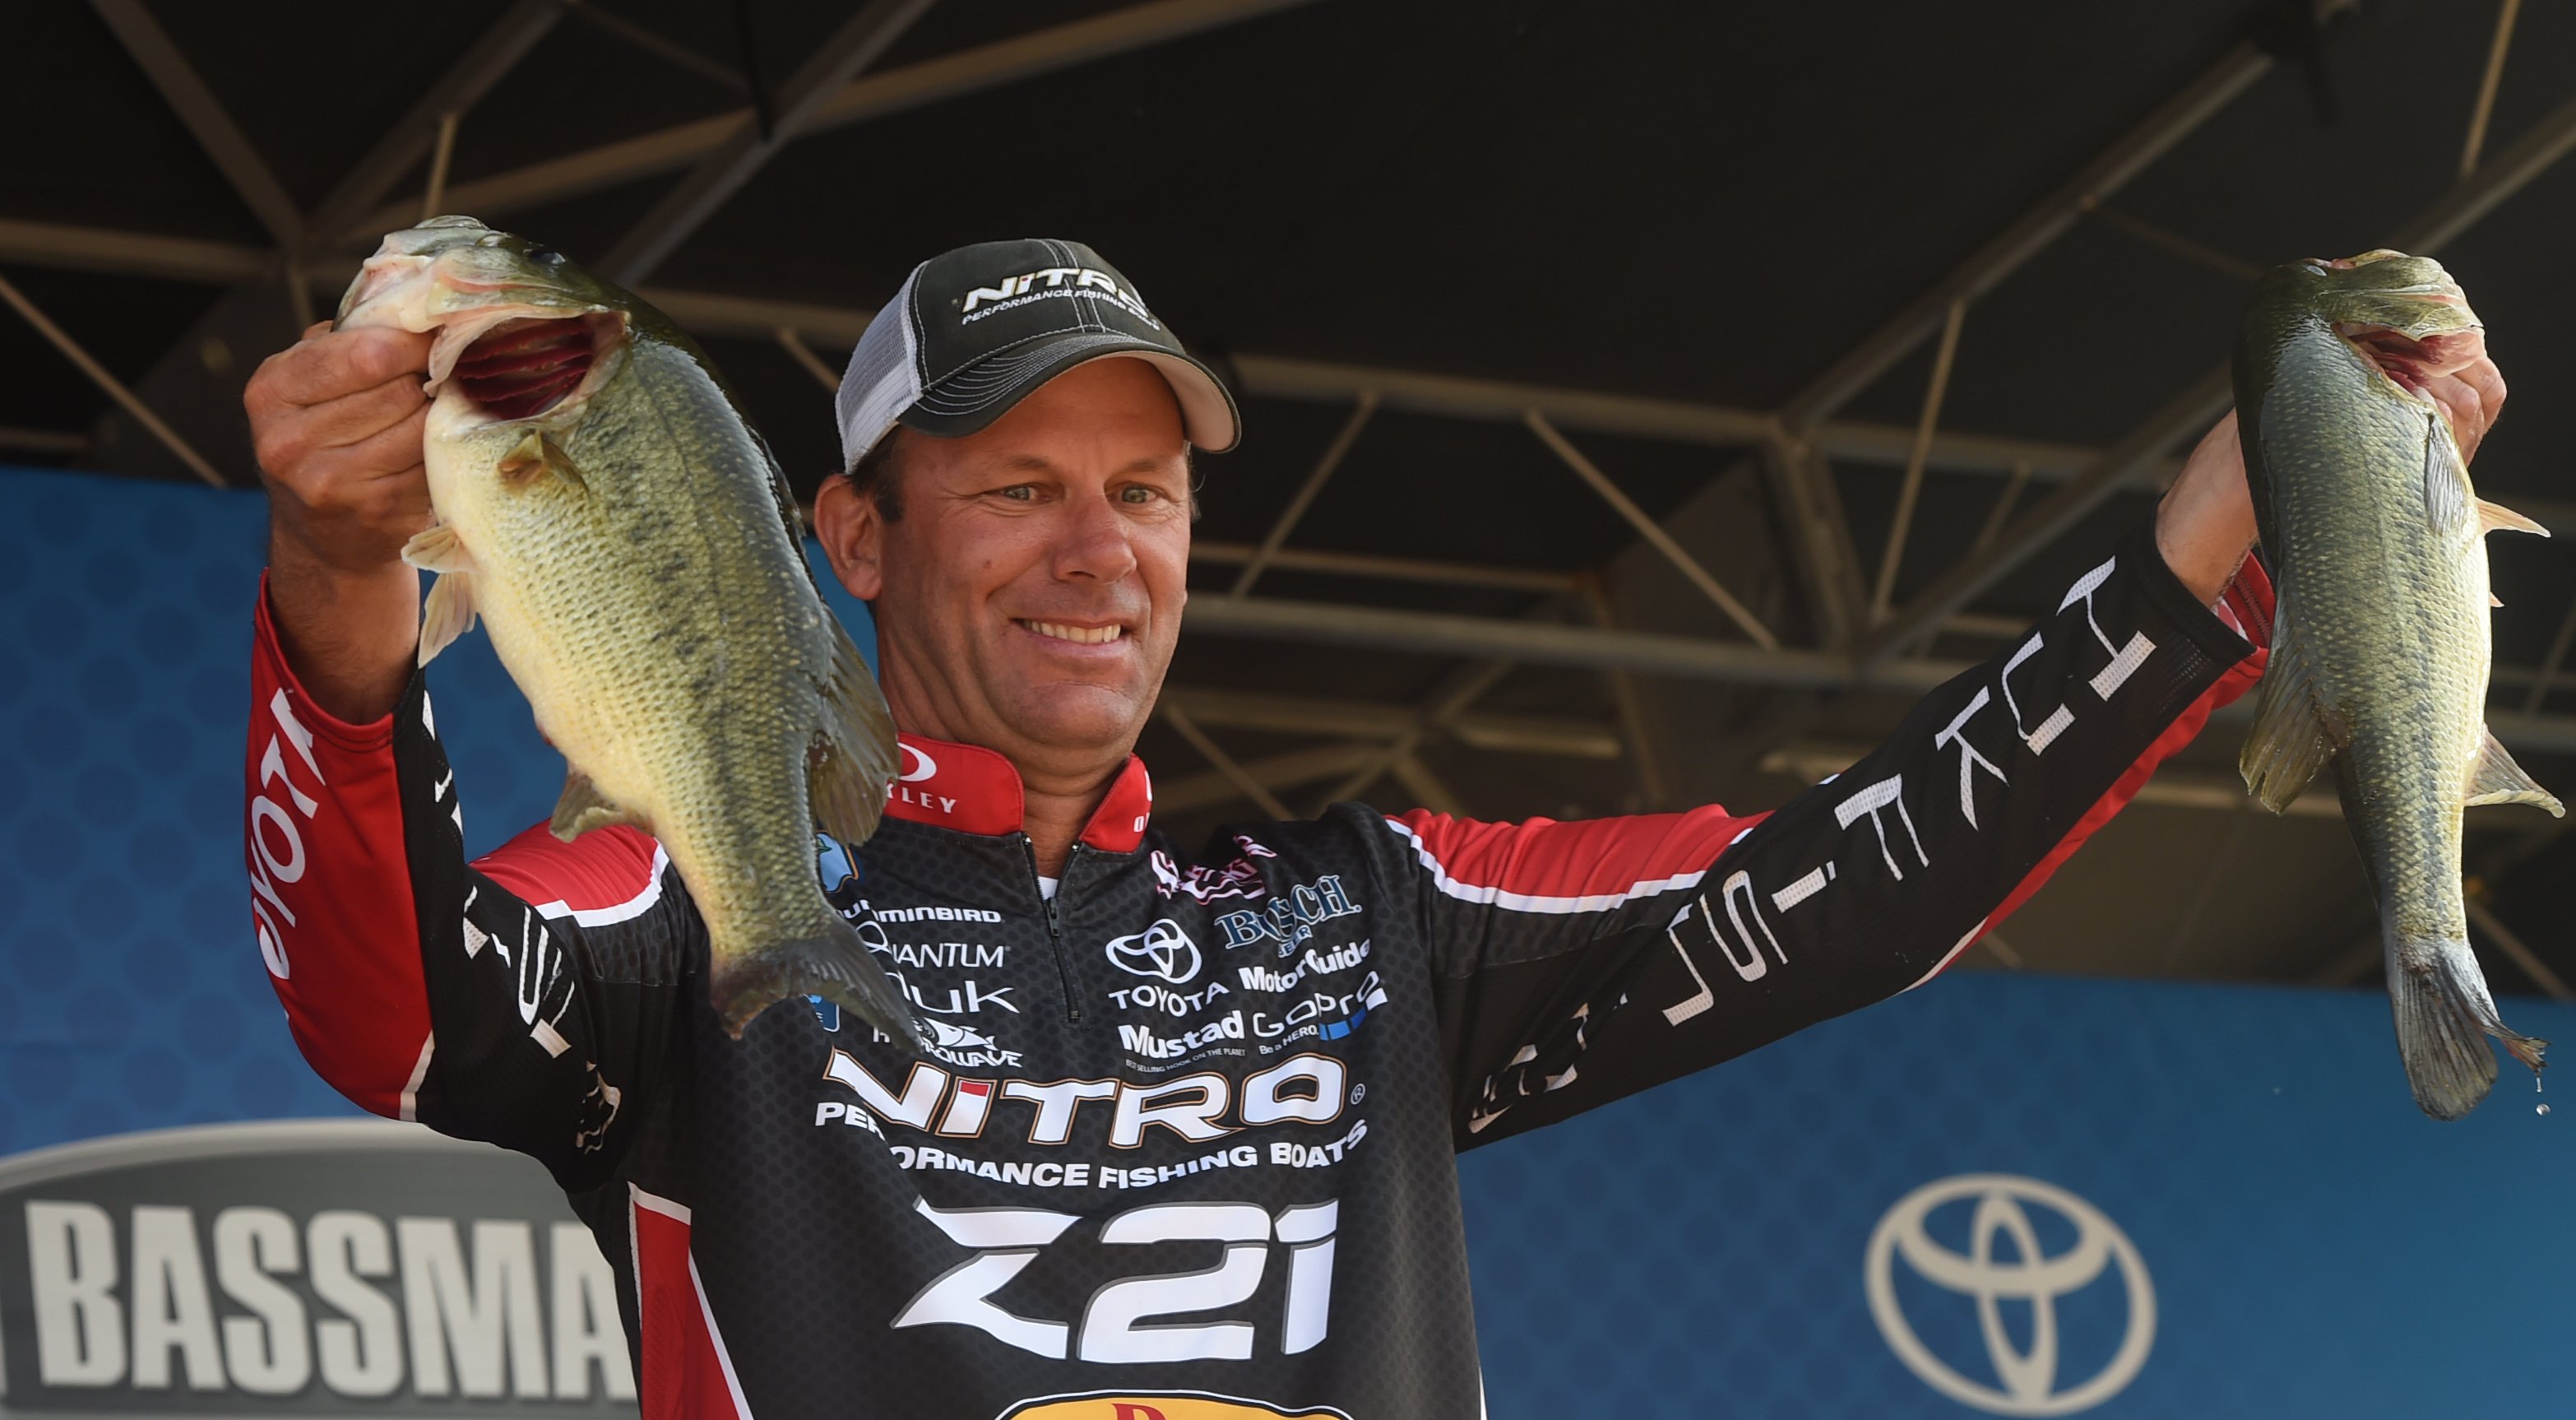 Bass fishing's biggest star brings farewell tour to Bay City for Major  League Fishing finale 